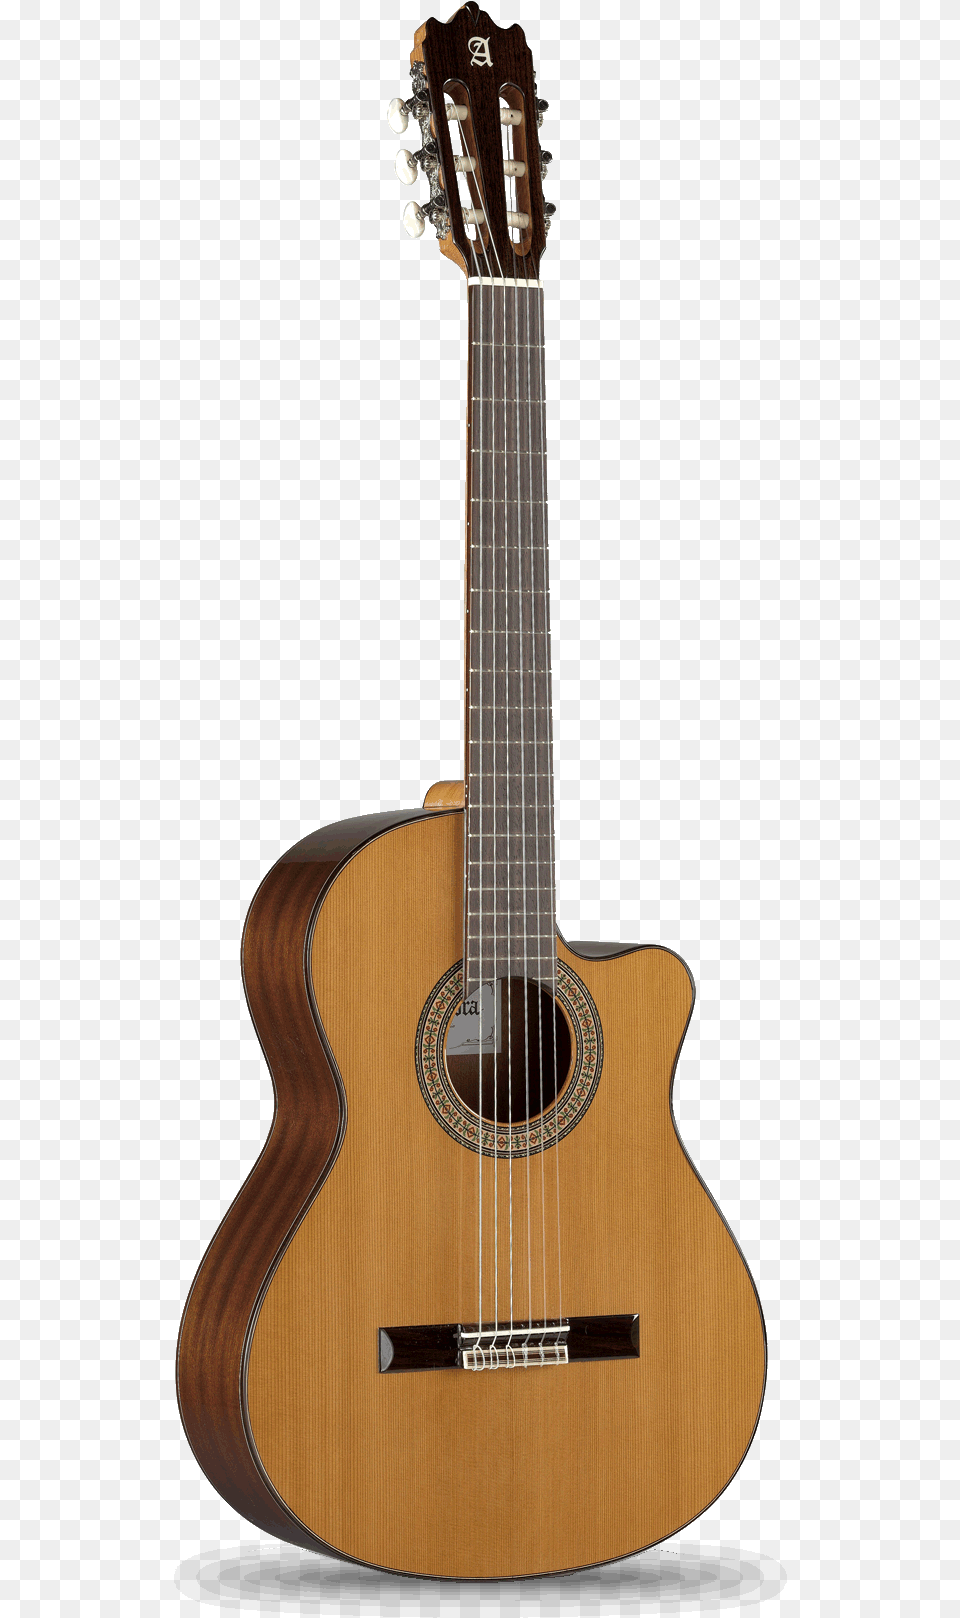 C Cw Model By Alhambra Guitars Alhambra Crossover Cs3 Cw, Guitar, Musical Instrument, Bass Guitar Png Image